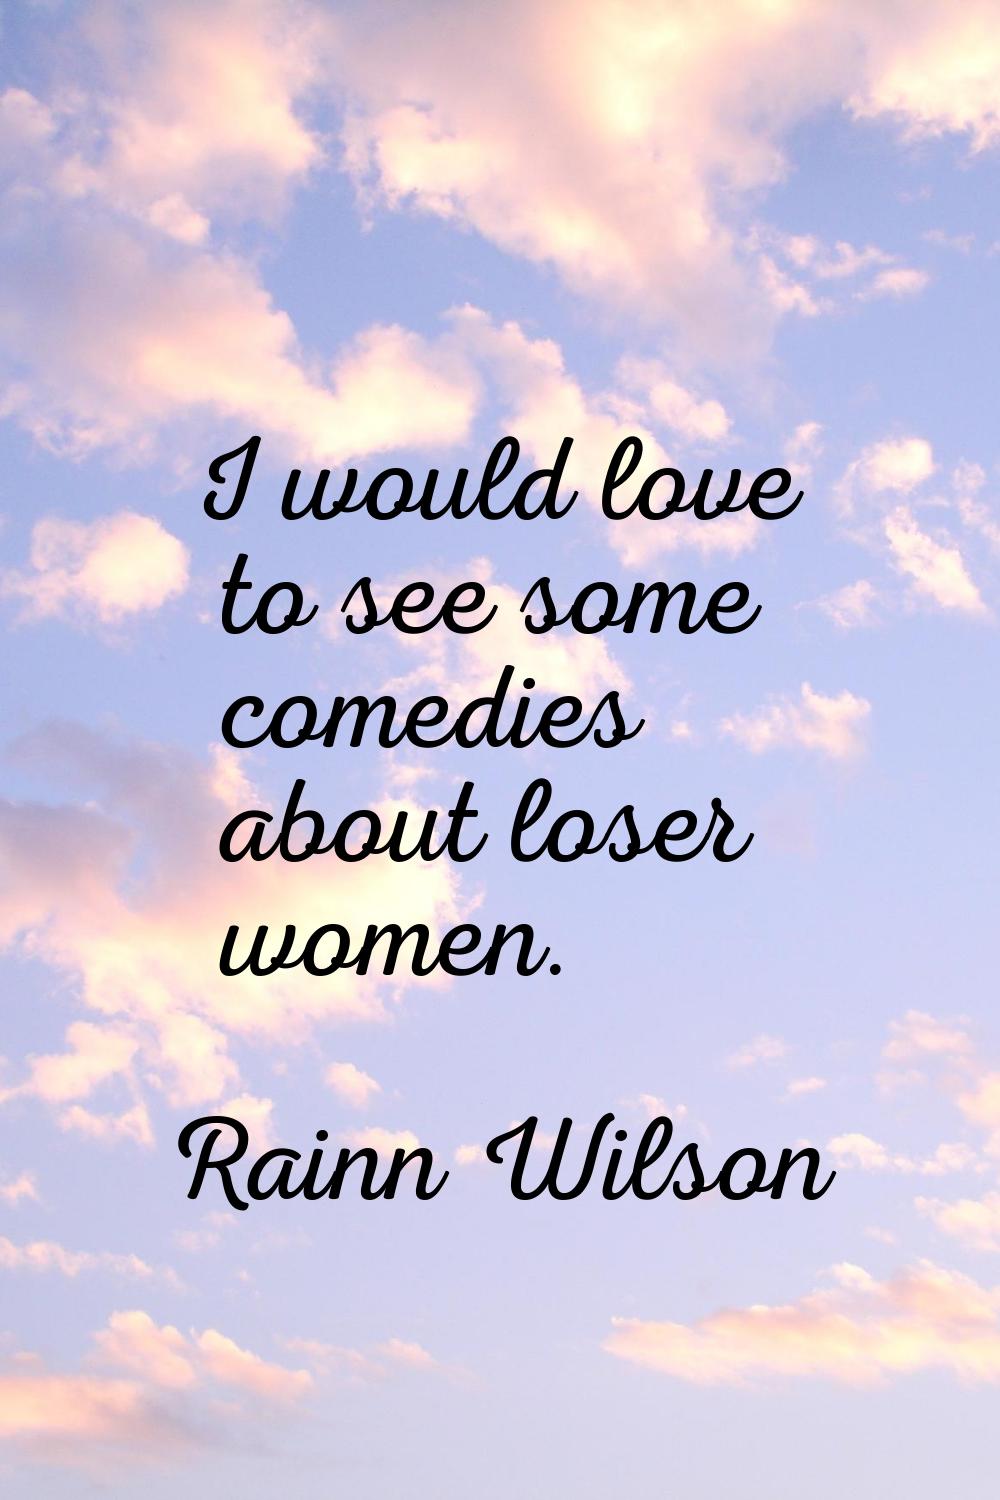 I would love to see some comedies about loser women.